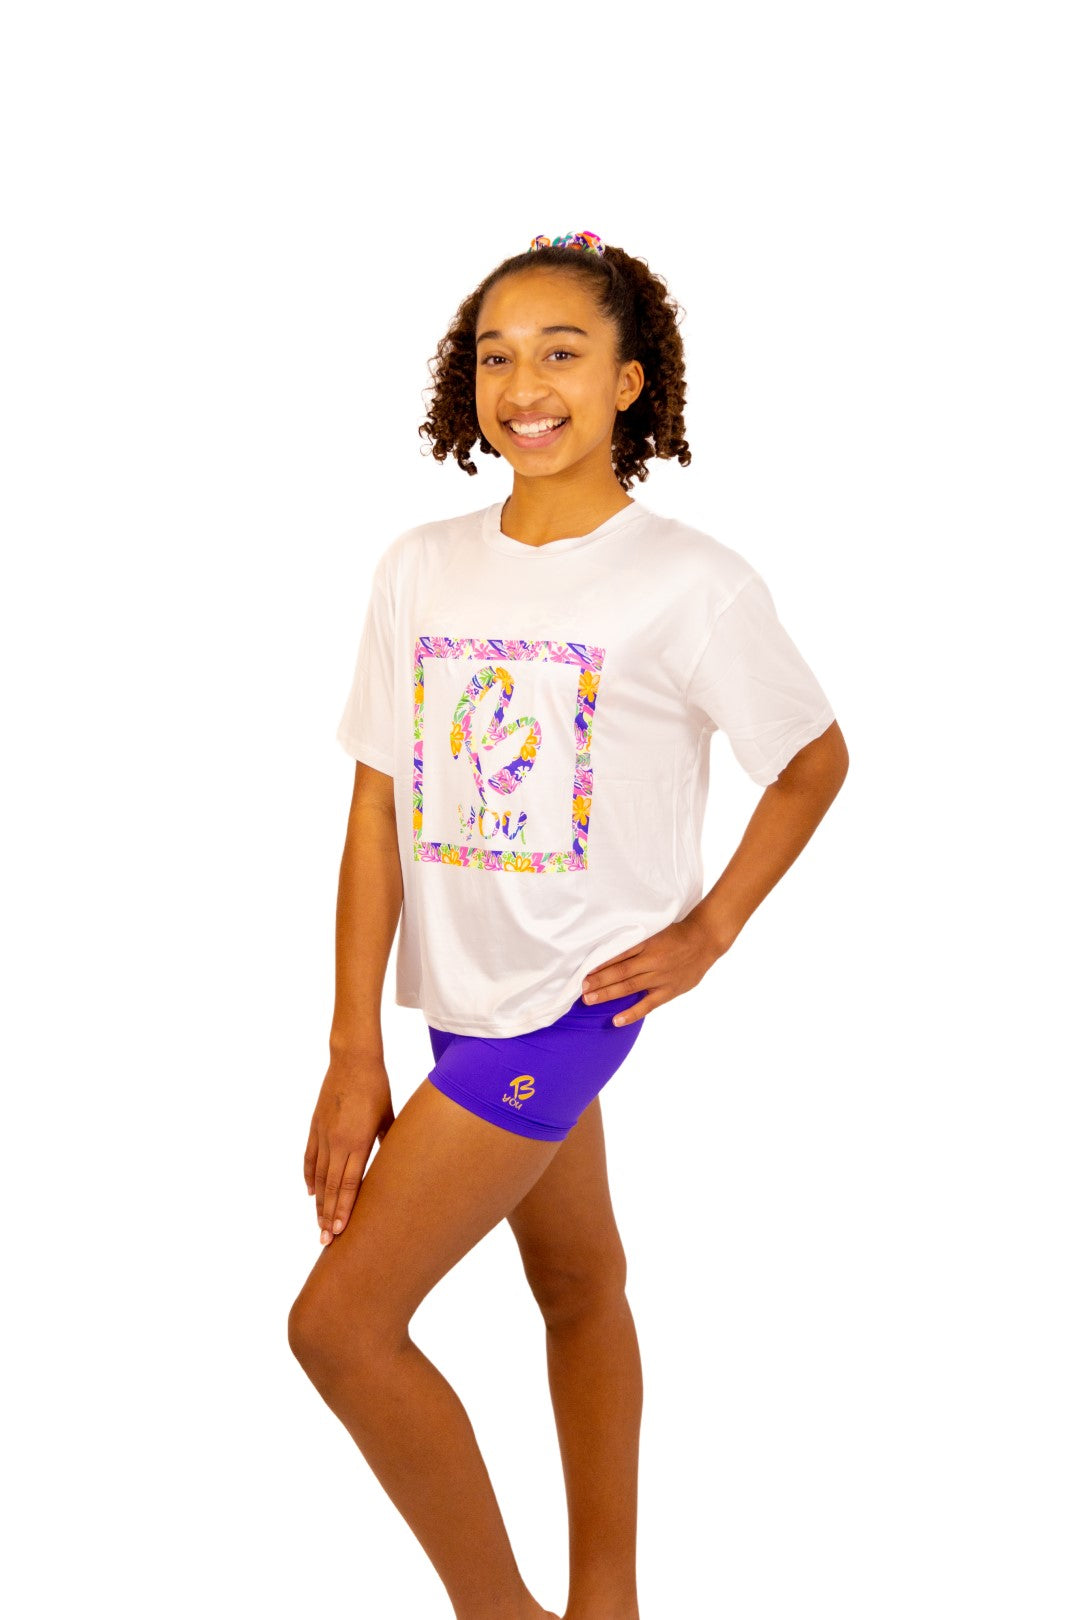 Soft Cropped White T Shirt for Girls. Tropical Print with B you Logo on a White Background. Activewear for Girls, Gymnastics wear, girls clothing, leotards. Girls Sports Clothing. B you Active, B you leotards, B you Swimwear.